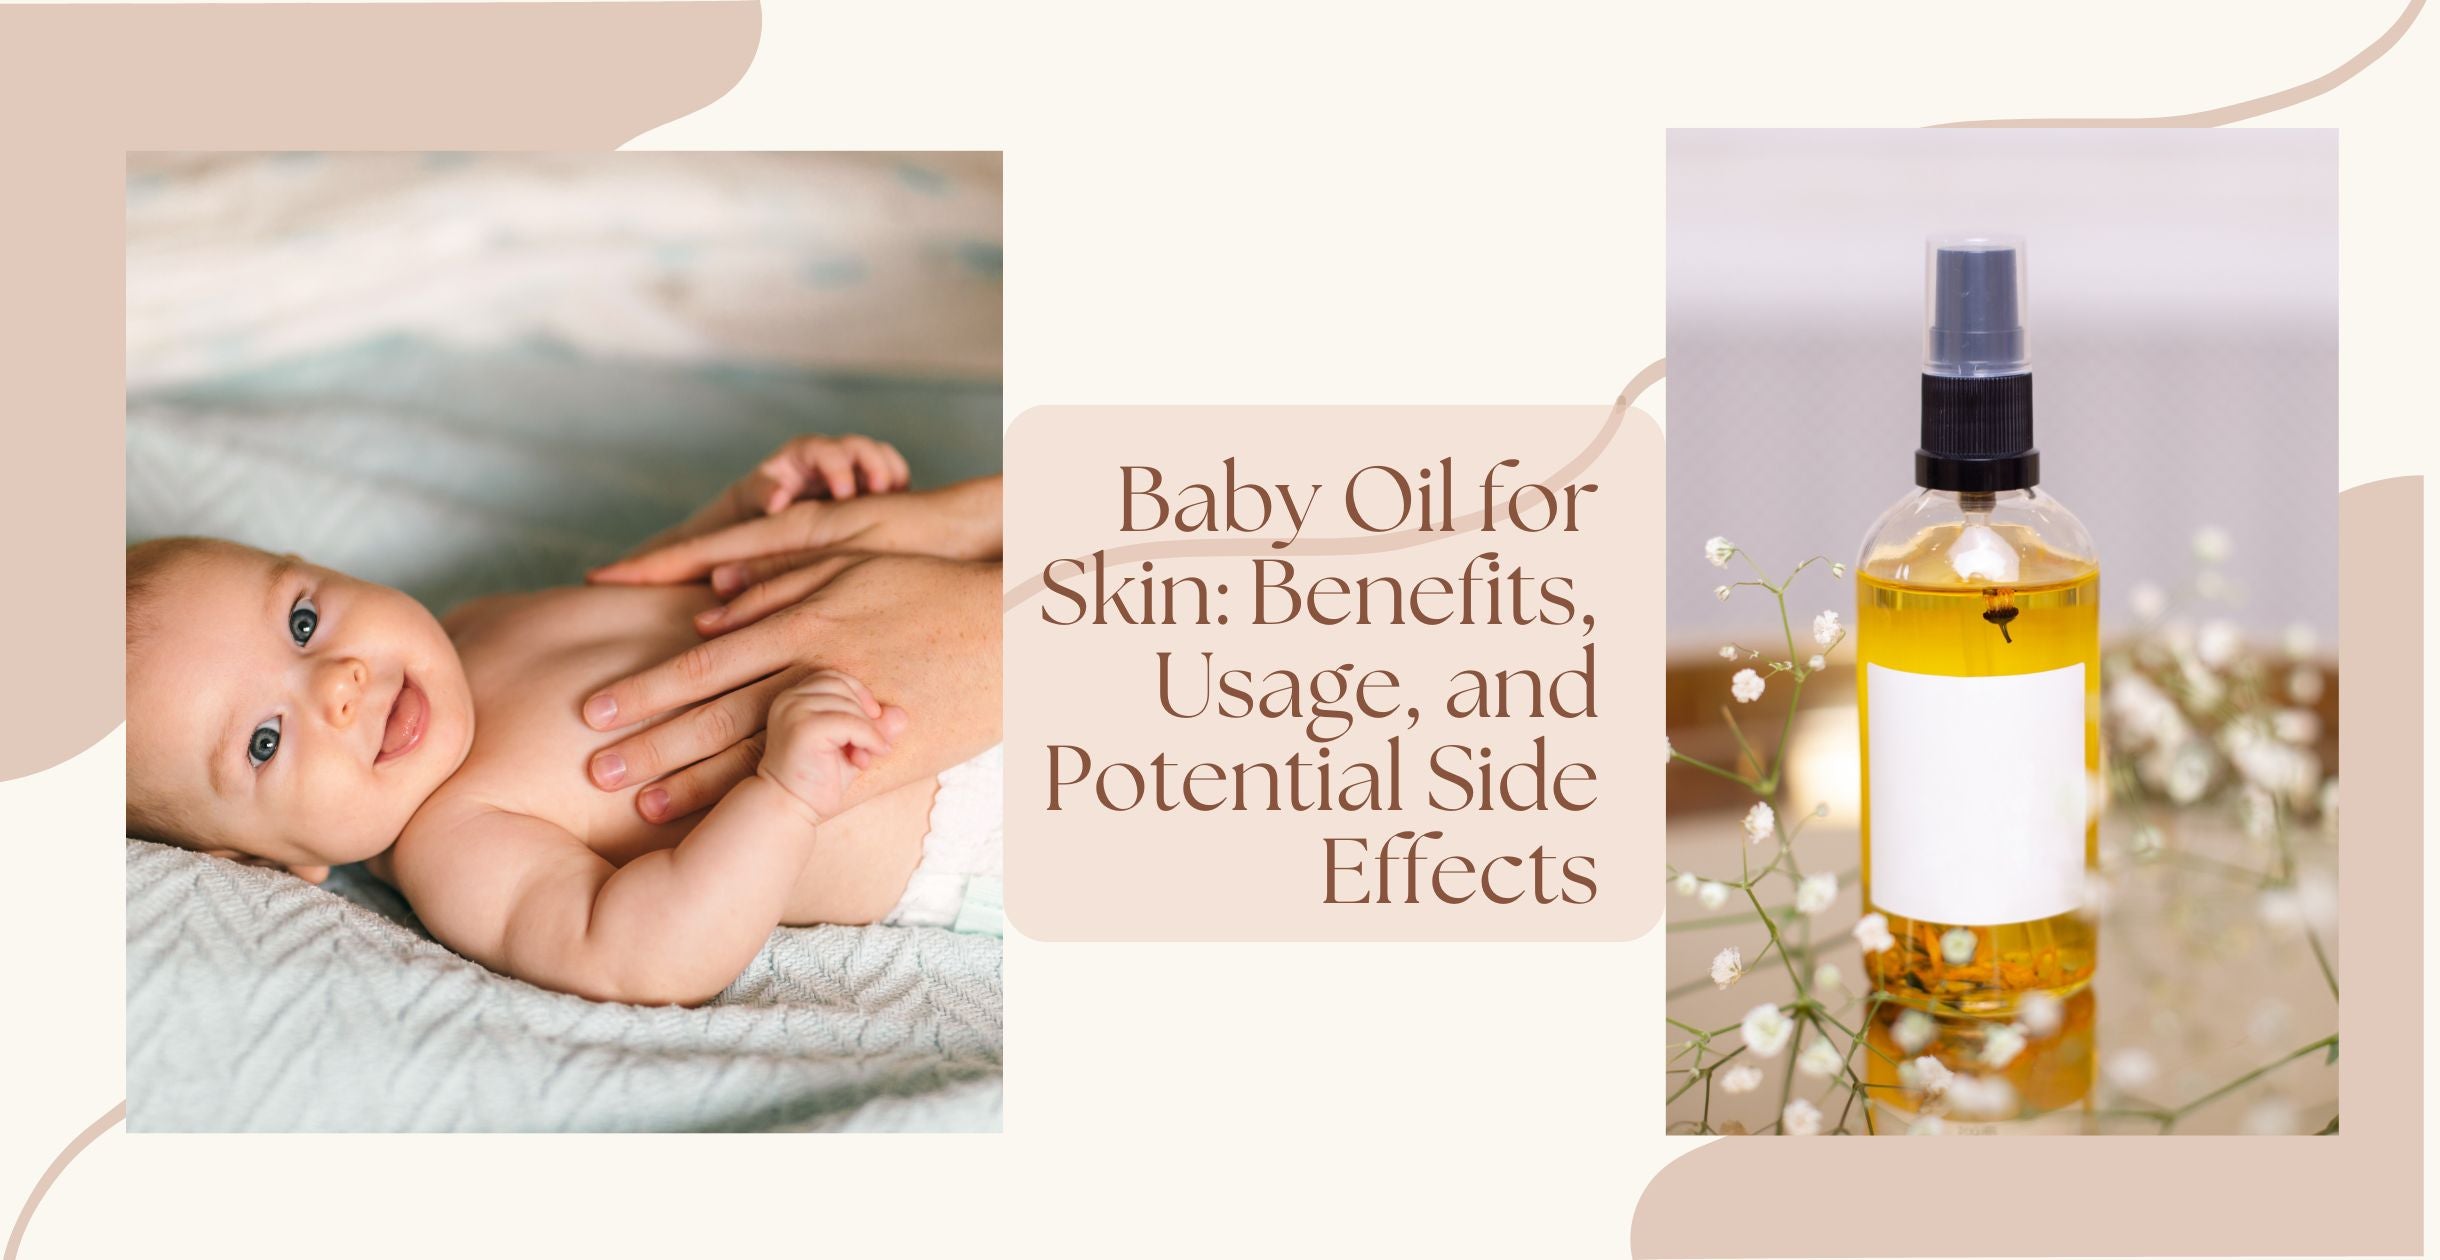 Baby Oil for Skin: Benefits, Usage, and Potential Side Effects